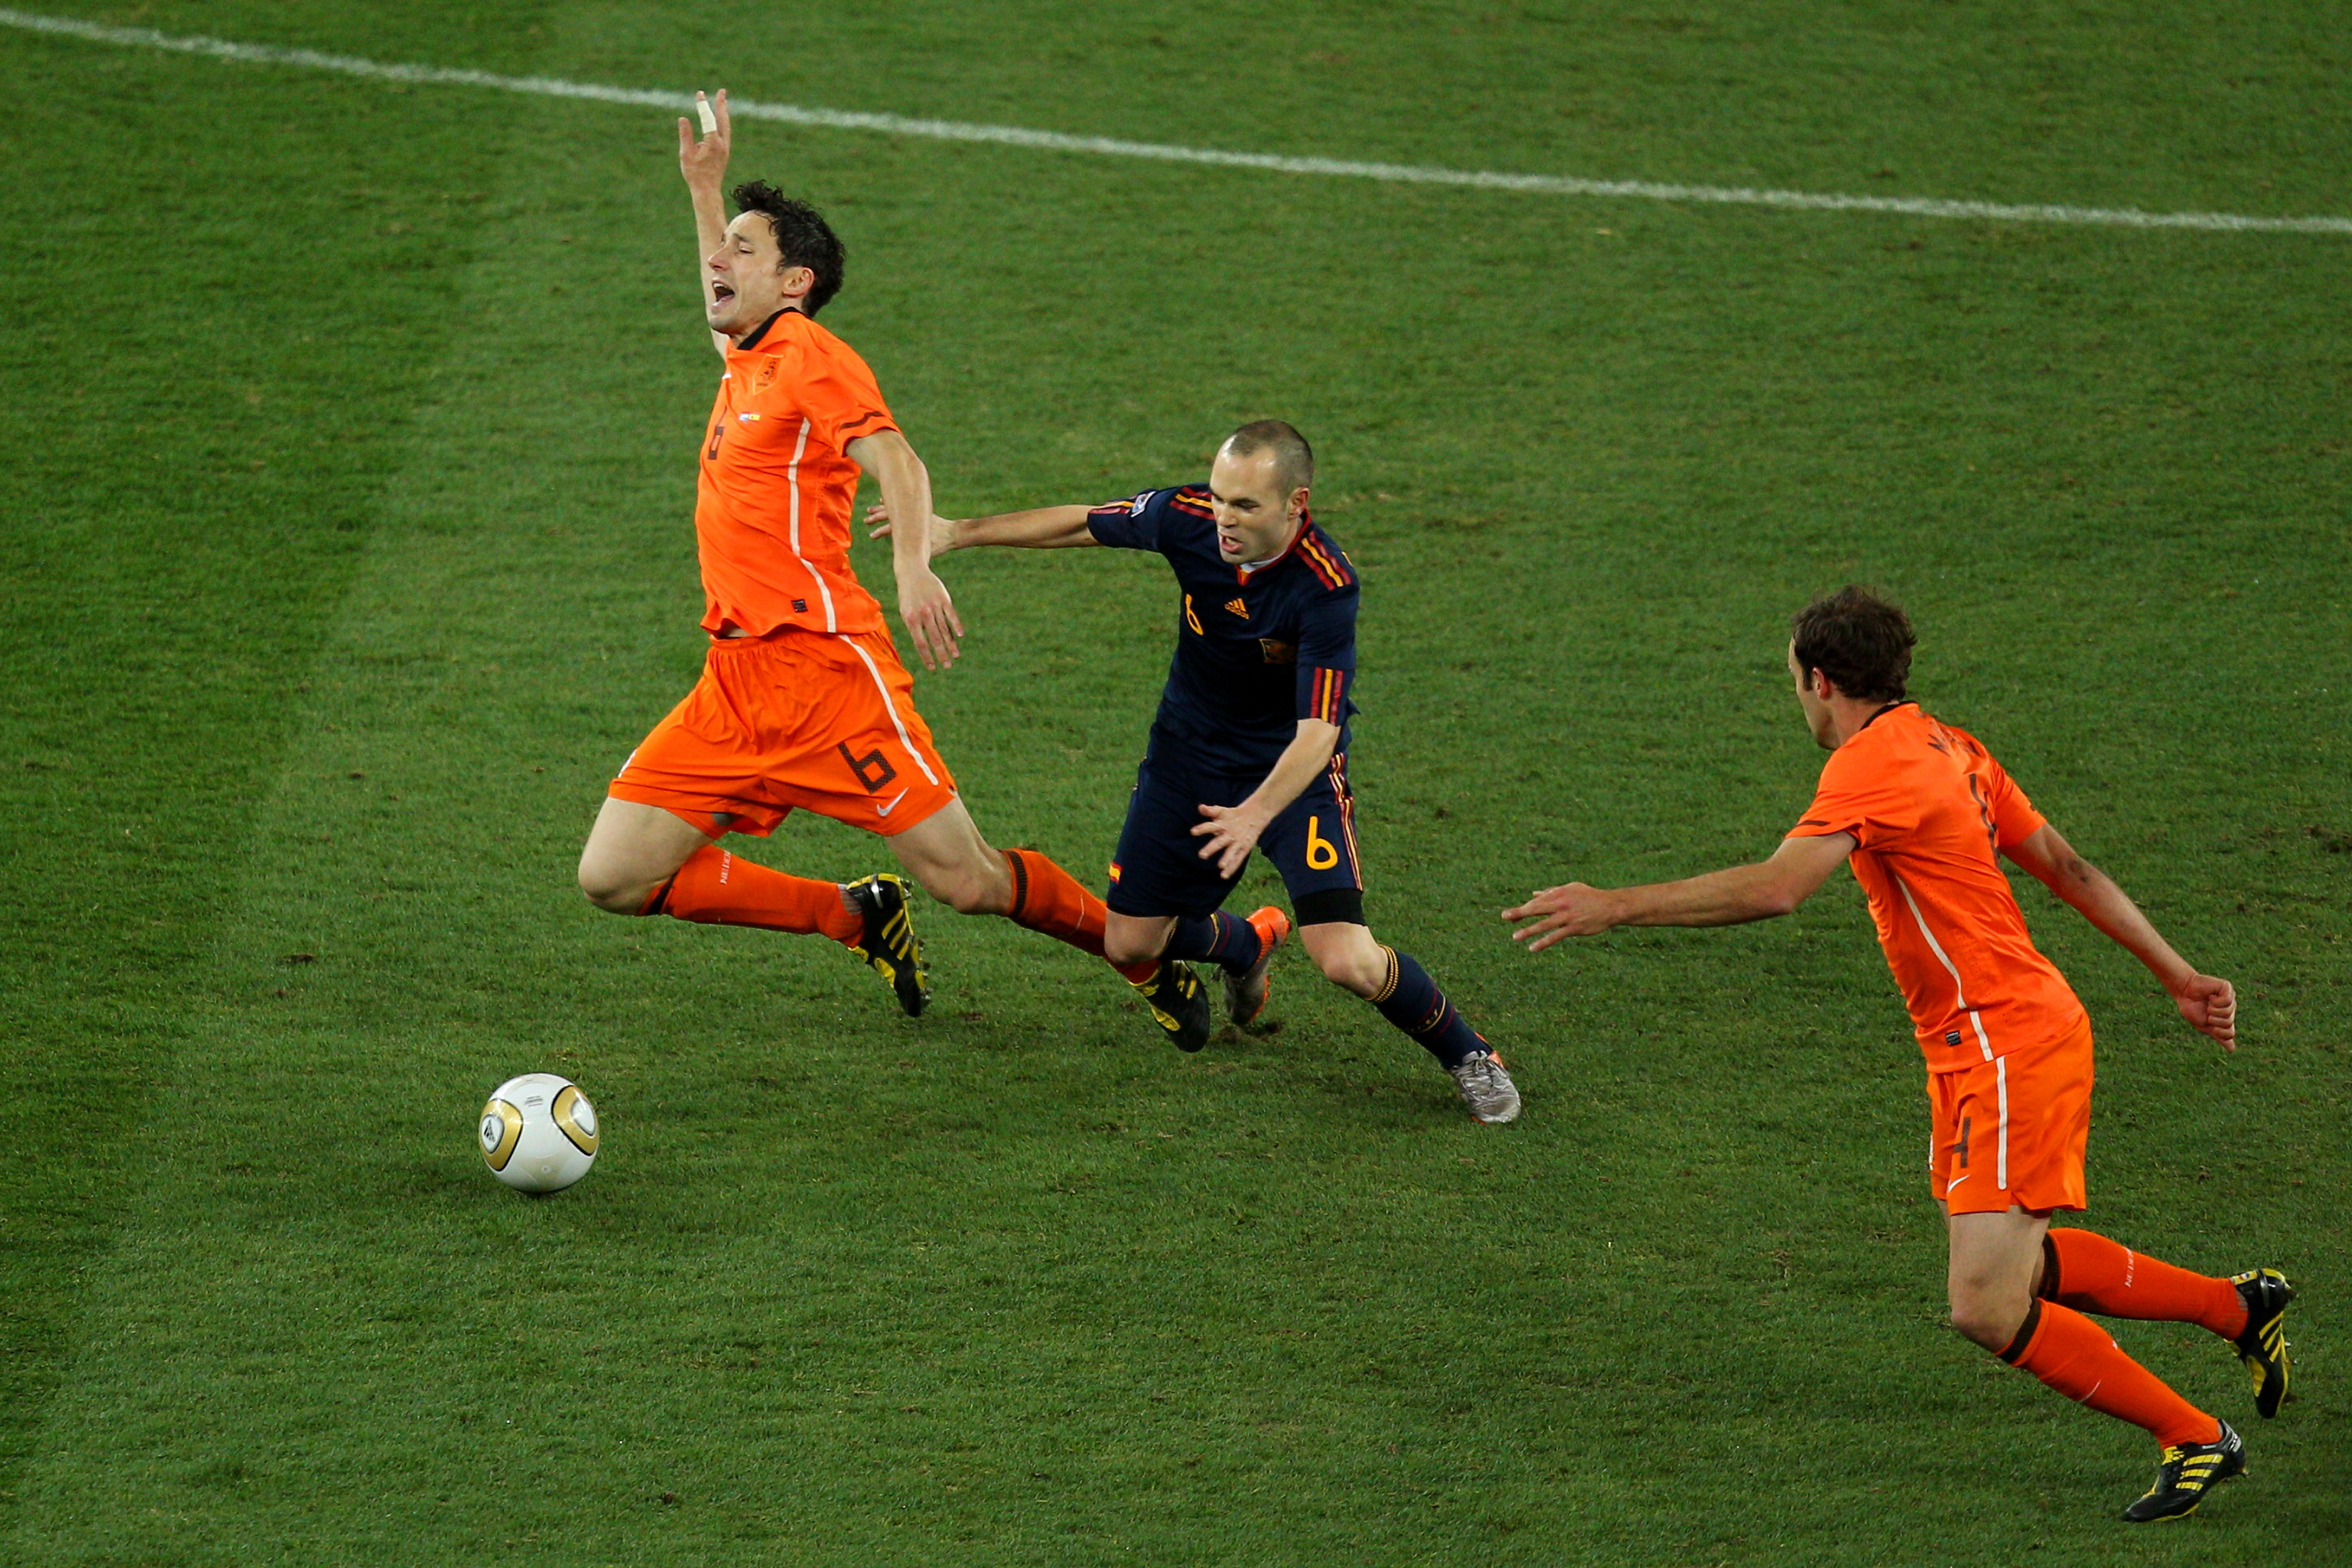 JOHANNESBURG, SOUTH AFRICA - JULY 11:  Mark Van Bommel of the Netherlands falls under the challenge of Andres Iniesta of Spain during the 2010 FIFA World Cup South Africa Final match between Netherlands and Spain at Soccer City Stadium on July 11, 2010 in